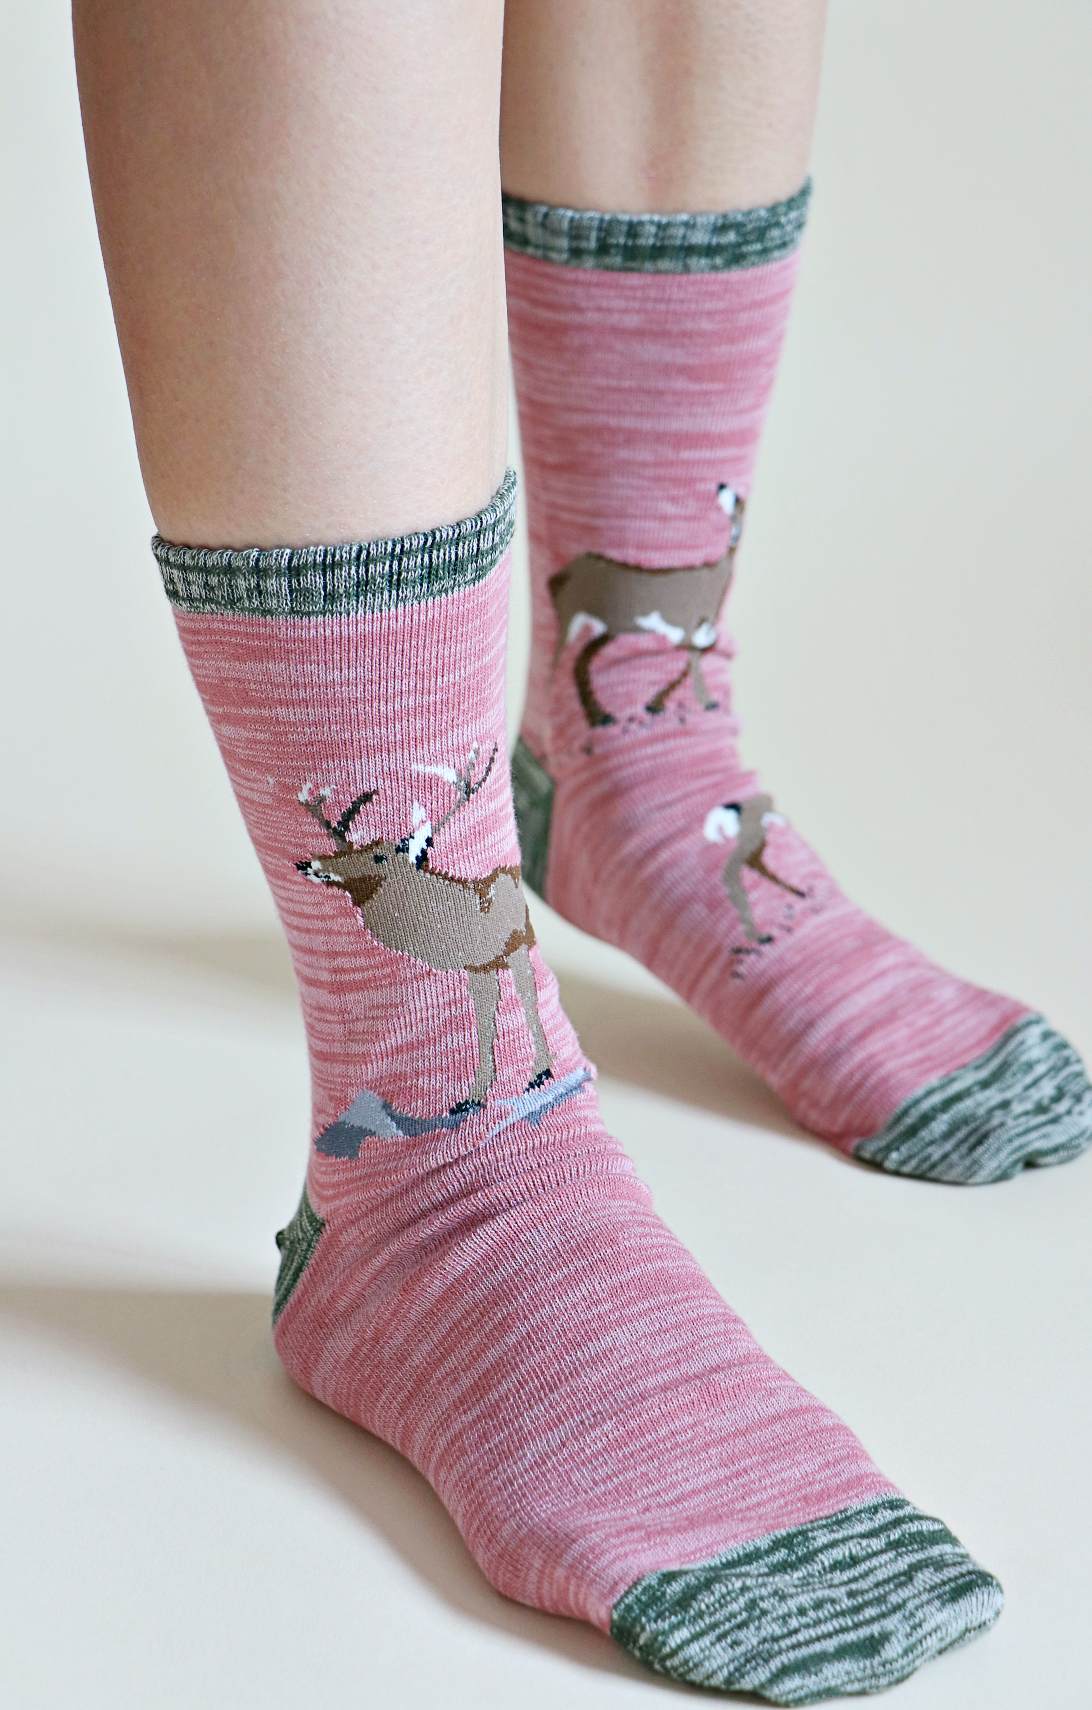 TABBISOCKS brand Replant Pairs Deer Organic Cotton Crew Socks in Rose color with grayish green deer pattern on the heel, toe and foot.